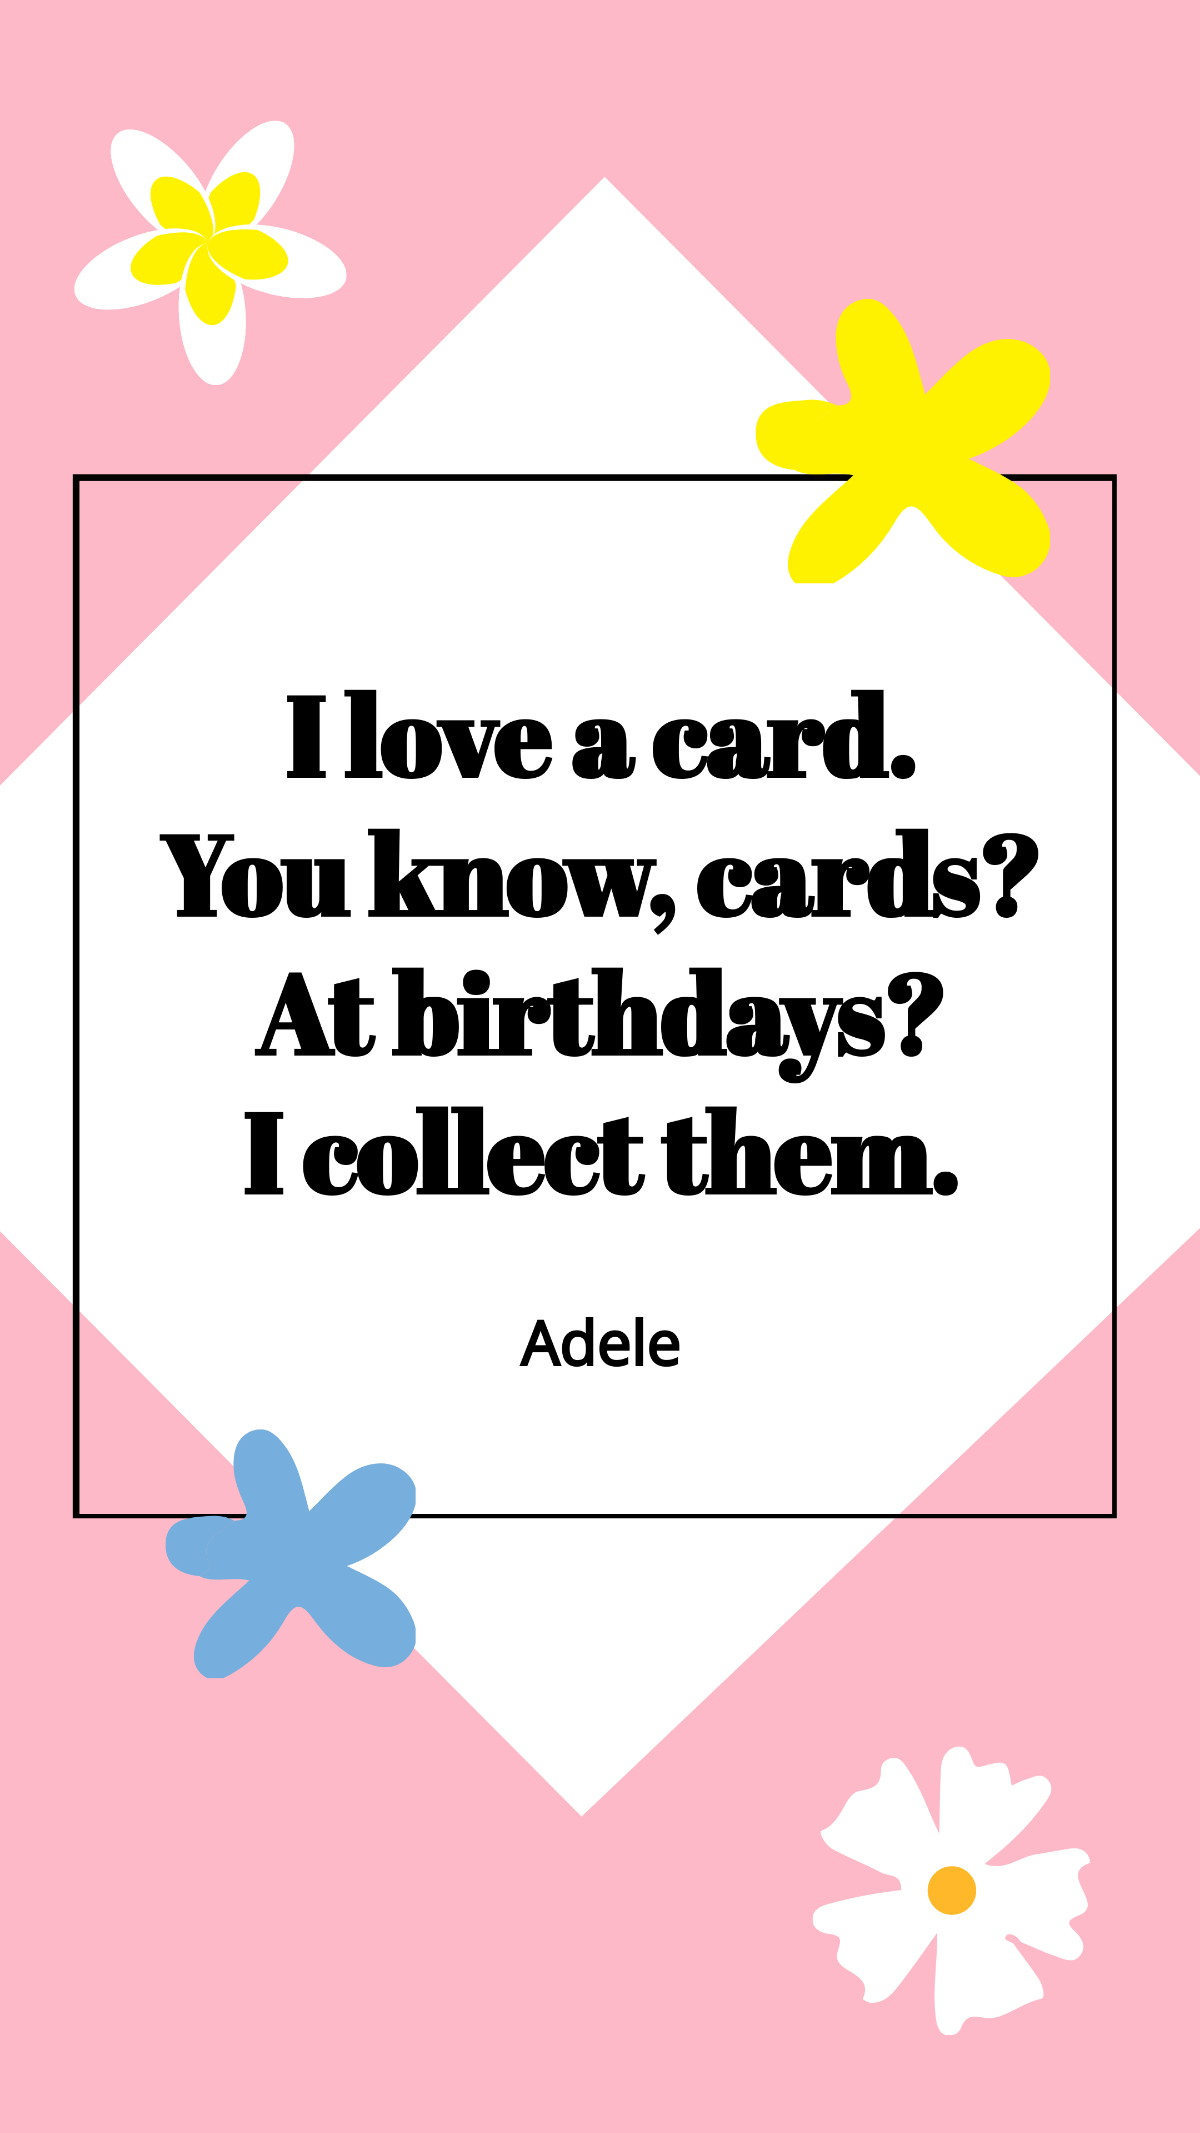 Adele - I love a card. You know, cards? At birthdays? I collect them. Template